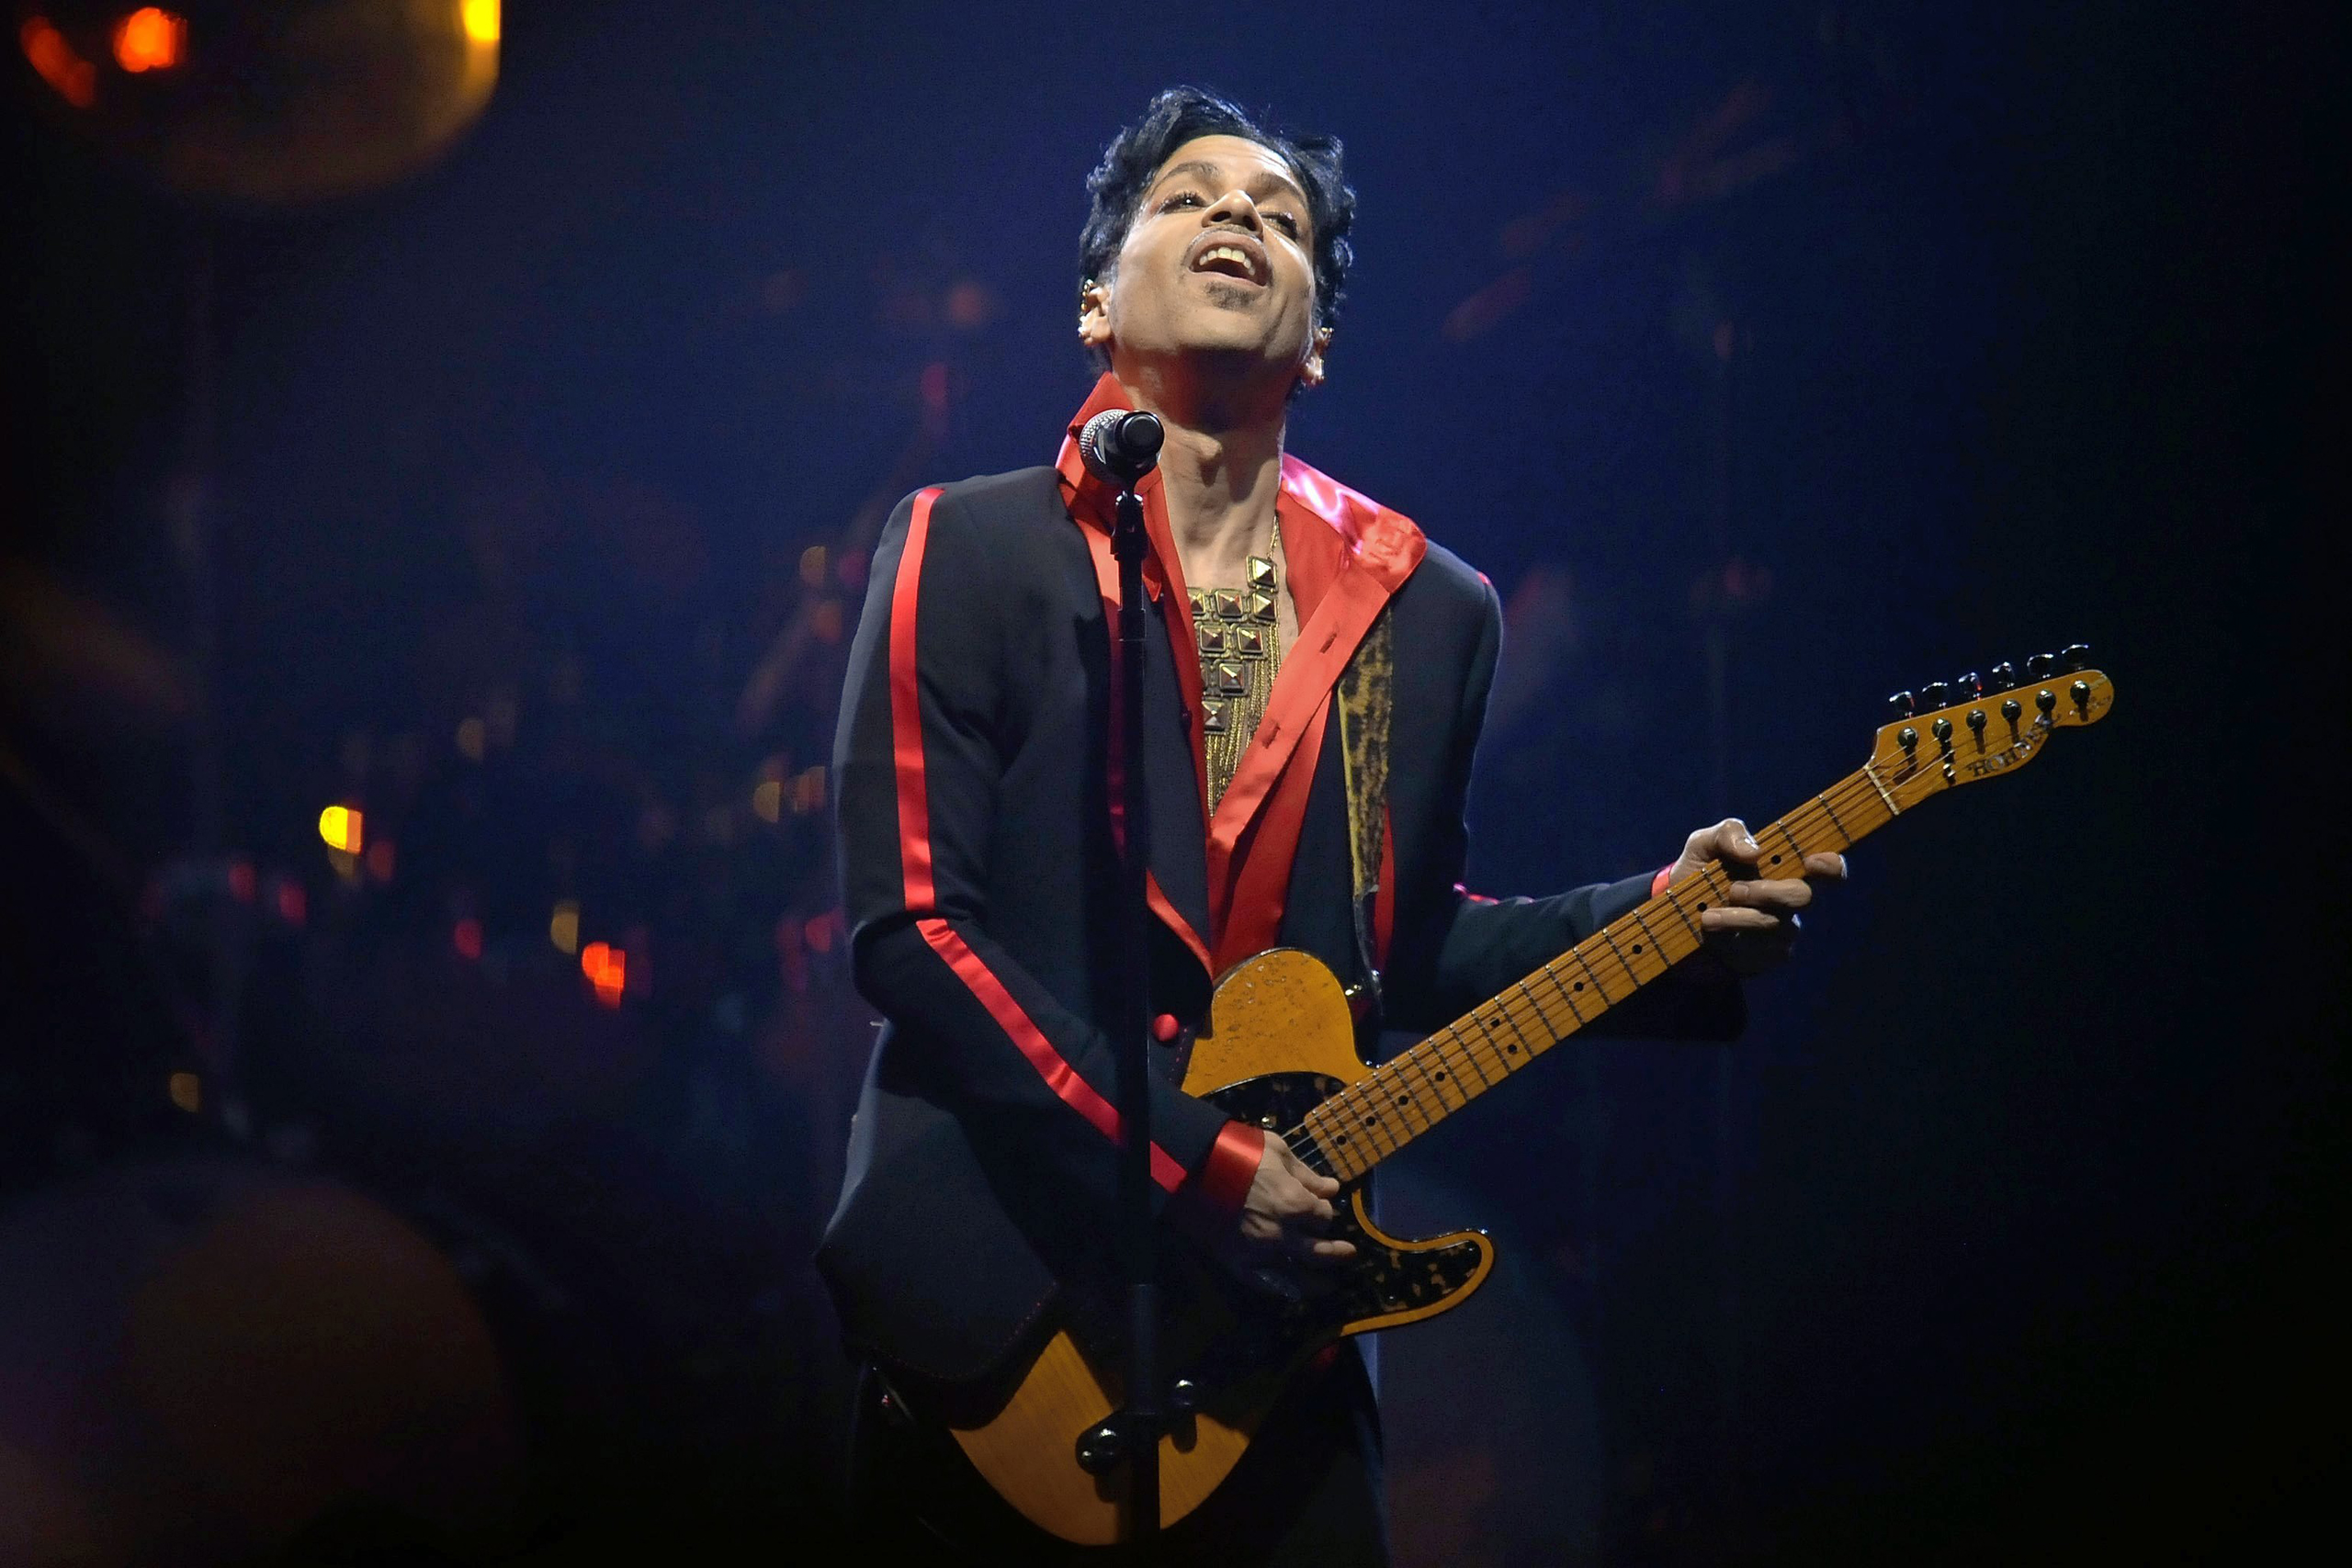 US musician Prince died from accidental overdose